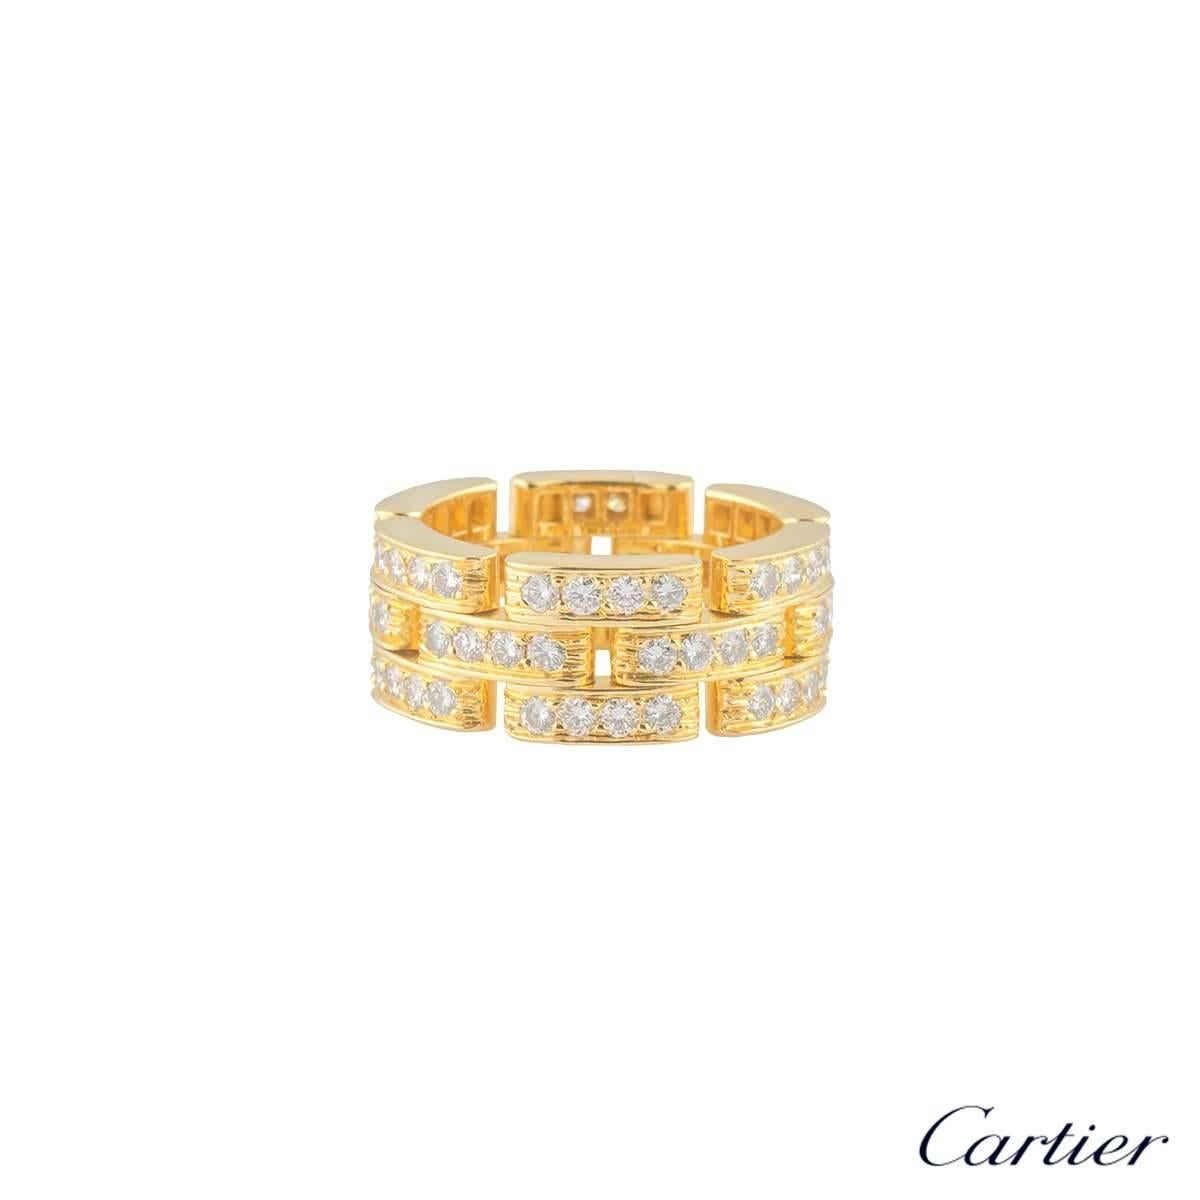 A stunning 18k yellow diamond Maillion Panthere ring from the Links and Chains collection by Cartier. The ring comprises of 18 open brick work design panels with each panel pave set with 5 round brilliant cut diamonds totalling 1.53ct, G colour and